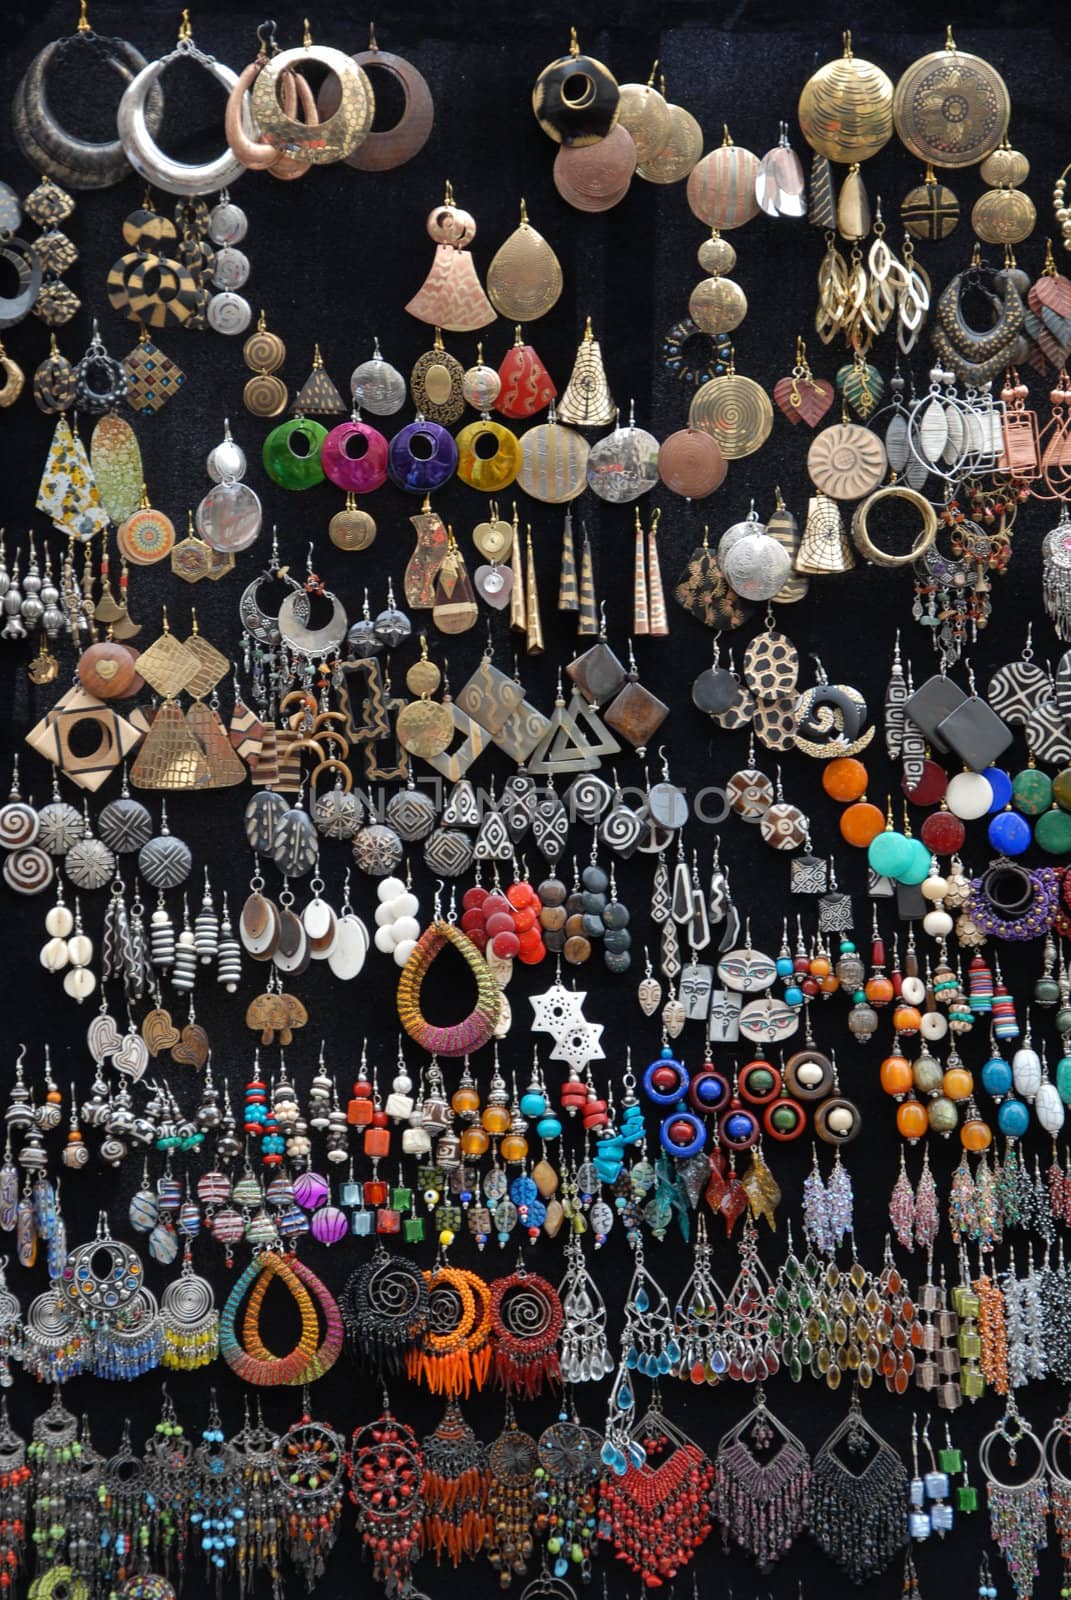 Earrings for sale at an outdoor market